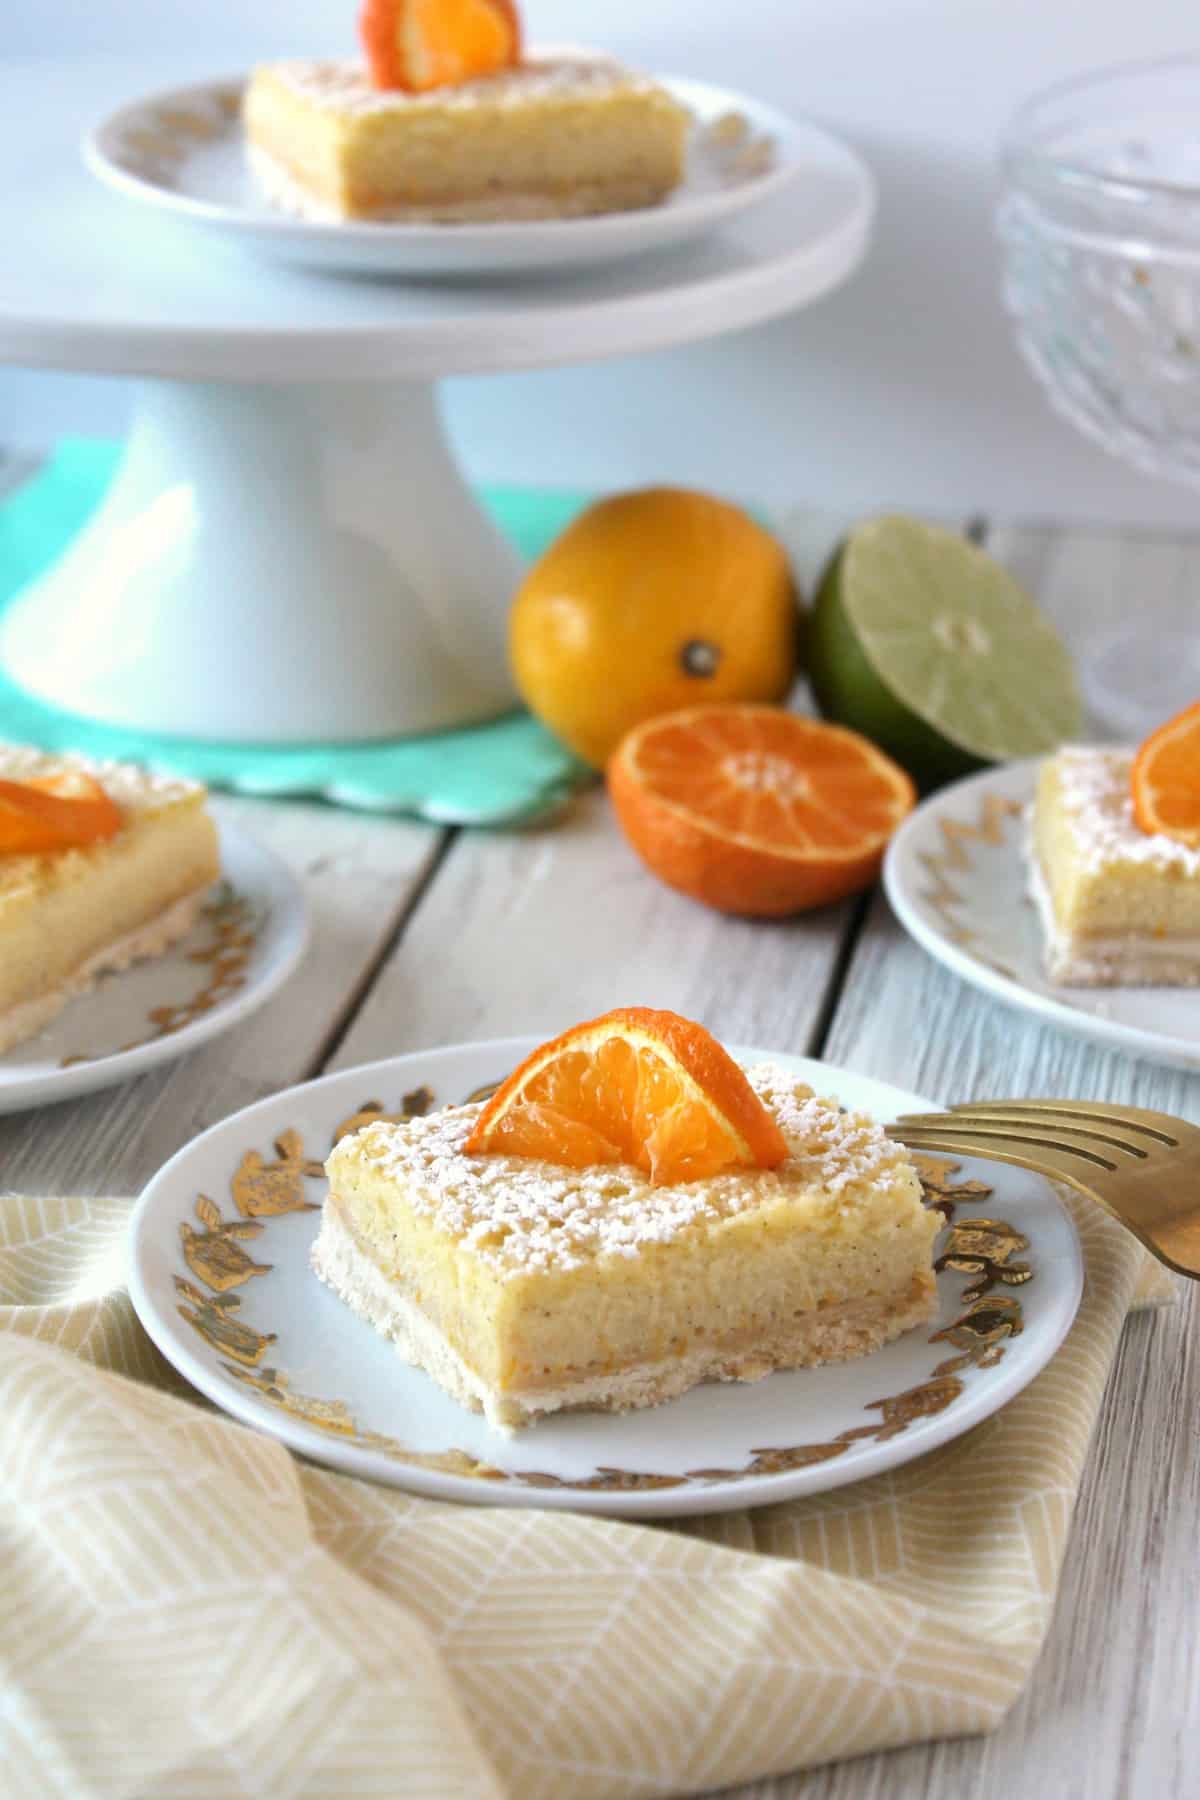 Vanilla Bean Citrus Bars! A crisp, shortbread crust is topped with a layer of sweet, citrusy filling speckled with fragrant vanilla beans. These are the stuff of potluck dreams!